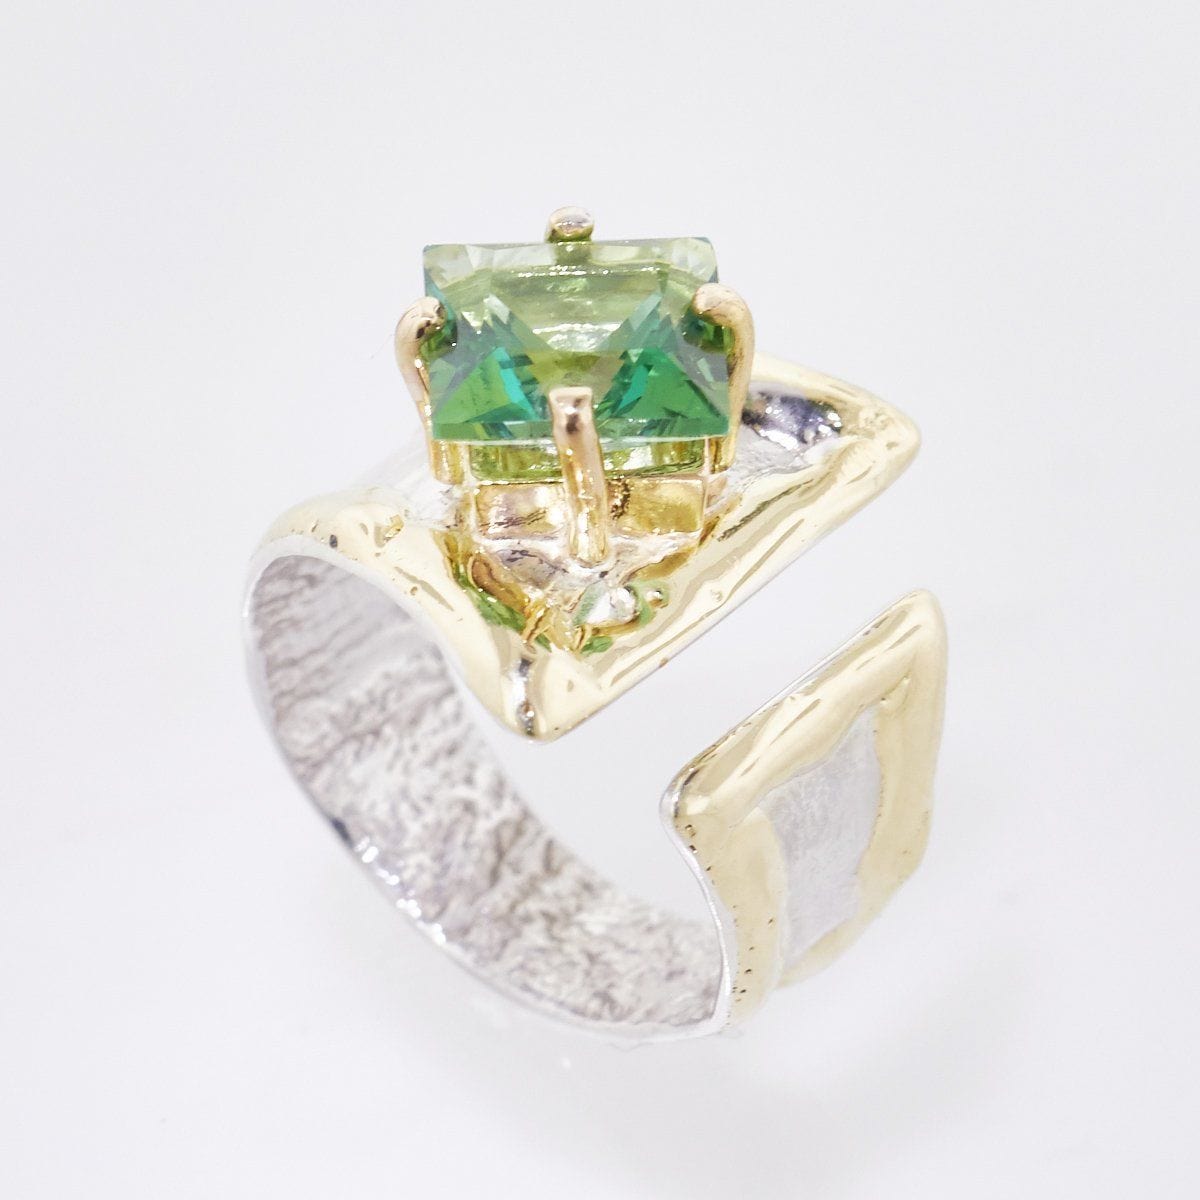 An antique 9 carat gold green topaz ring stamped 375. Ring size L. Weight:  2.57 grams.